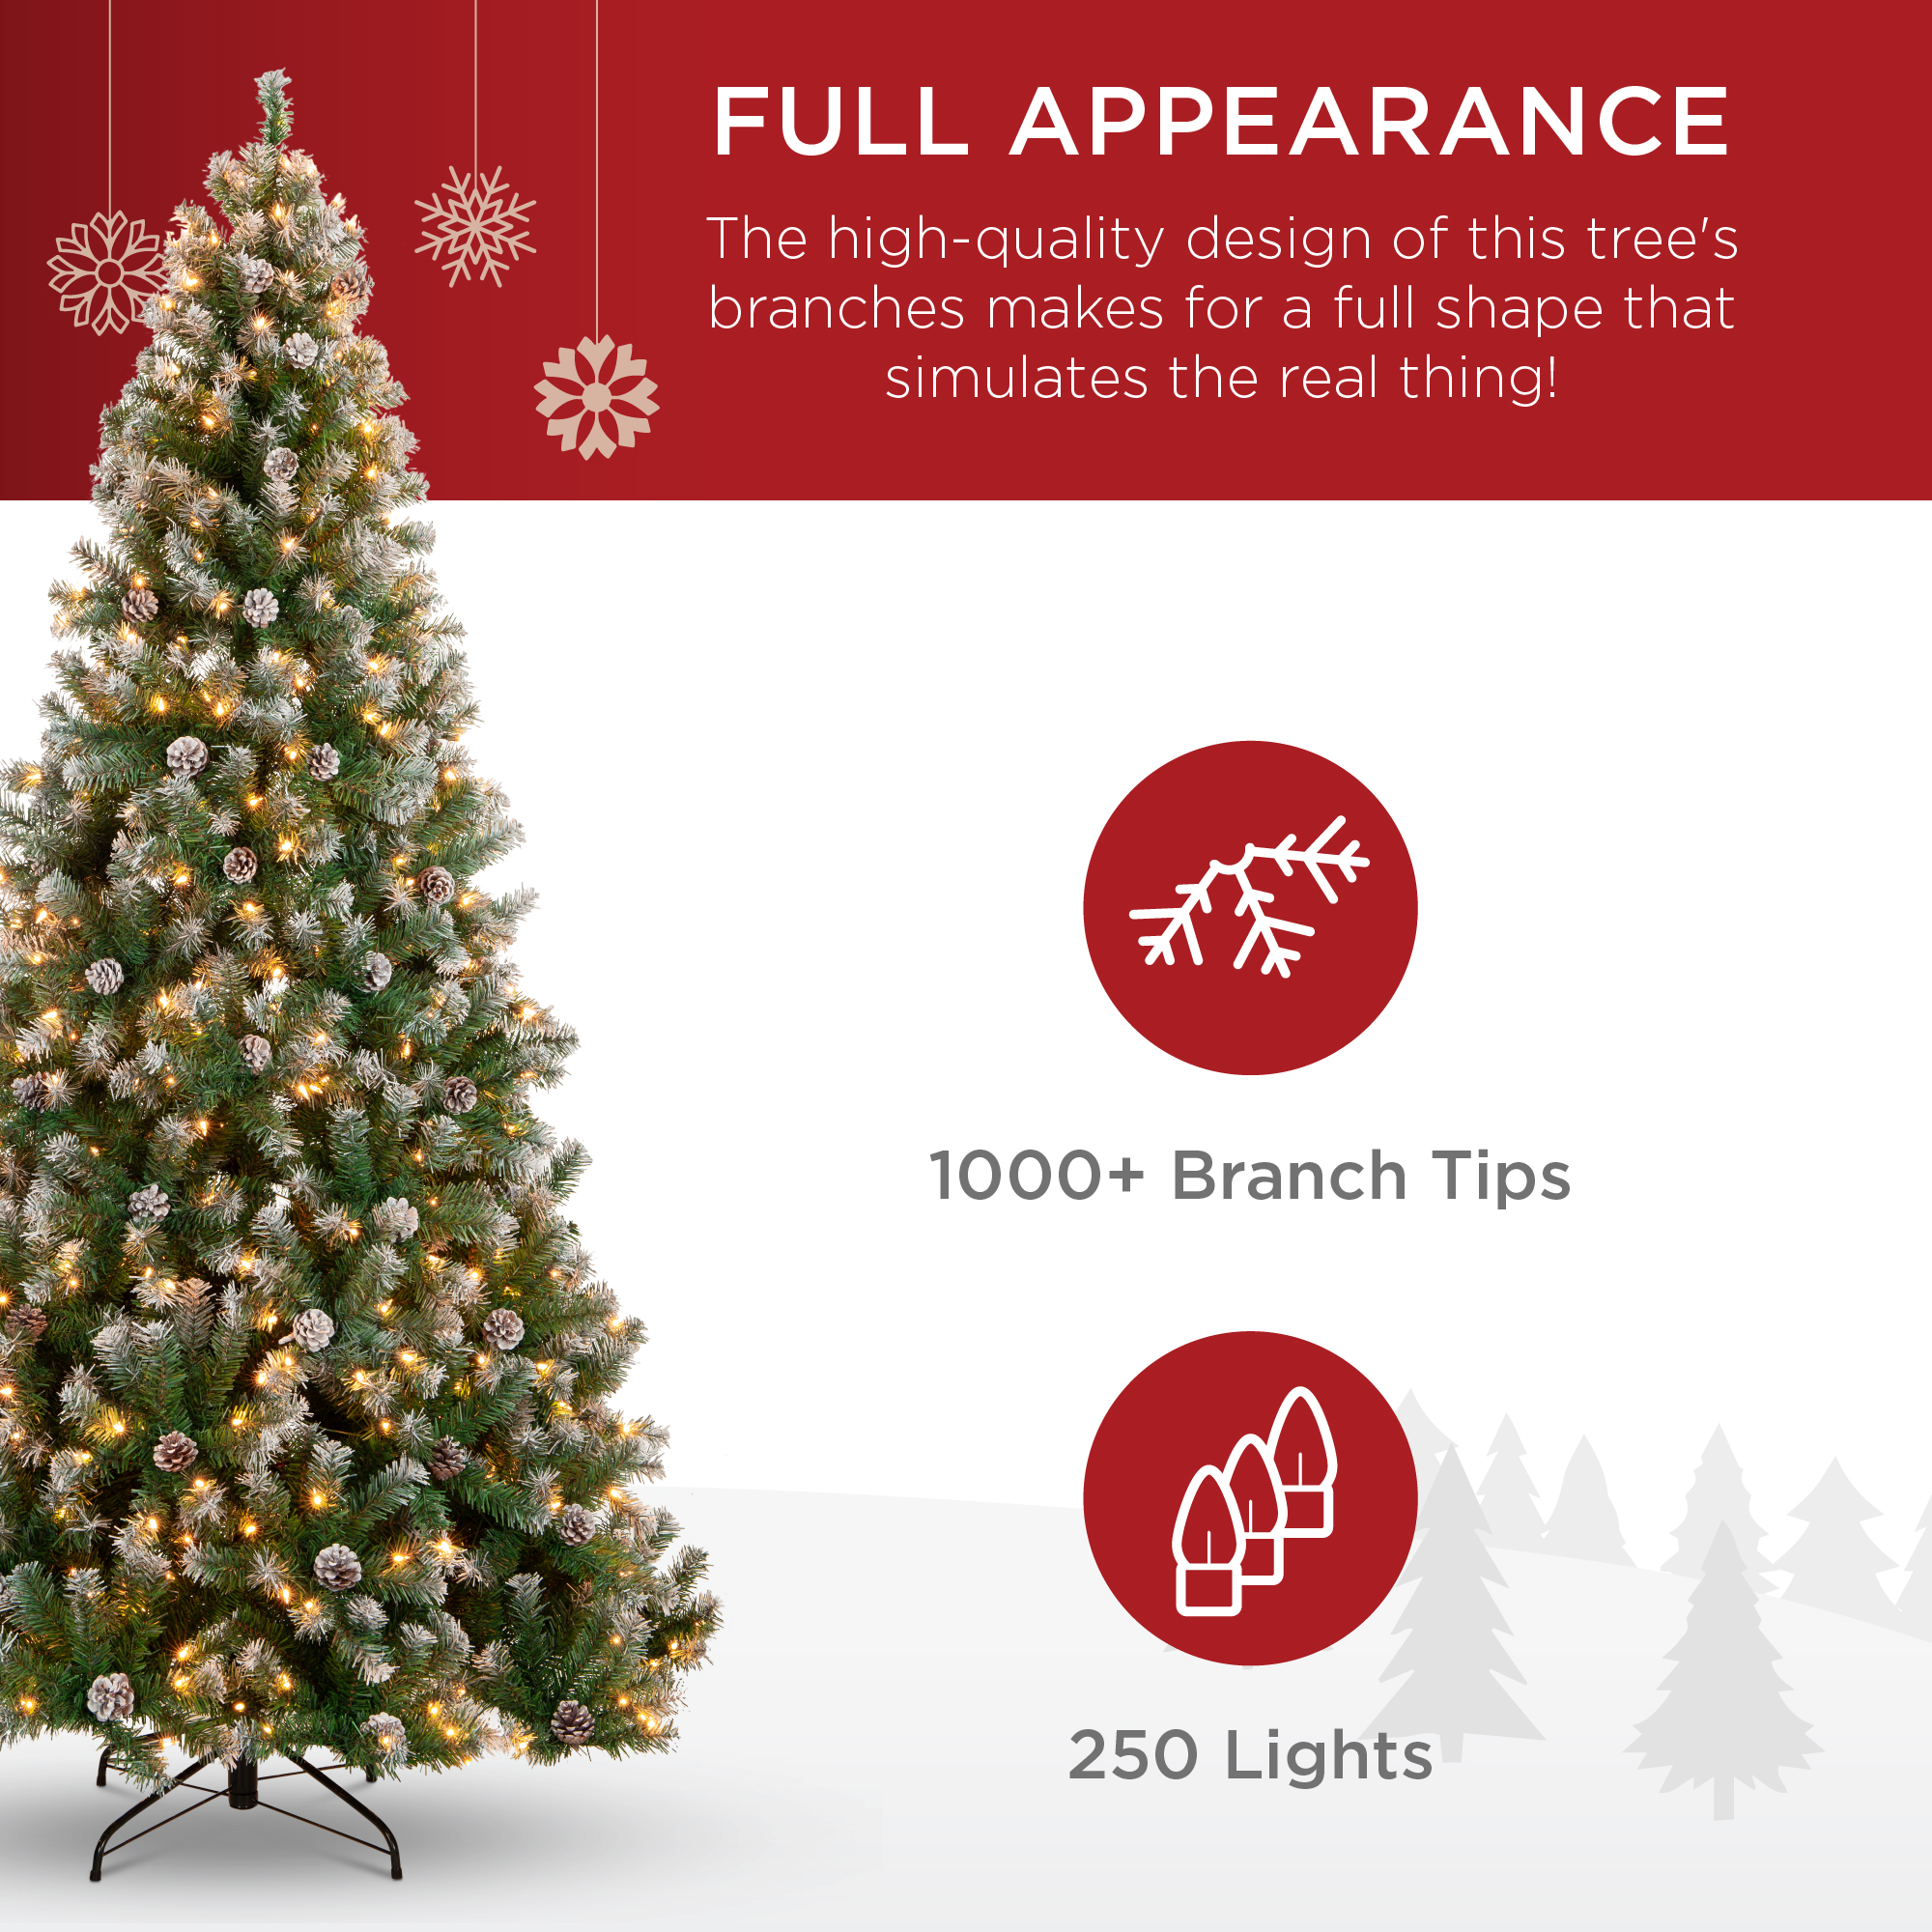 Best Choice Products 6ft Pre-Lit Pre-Decorated Holiday Christmas Tree w/ 1,000 Flocked Tips, 250 Lights, Metal Base - image 5 of 7